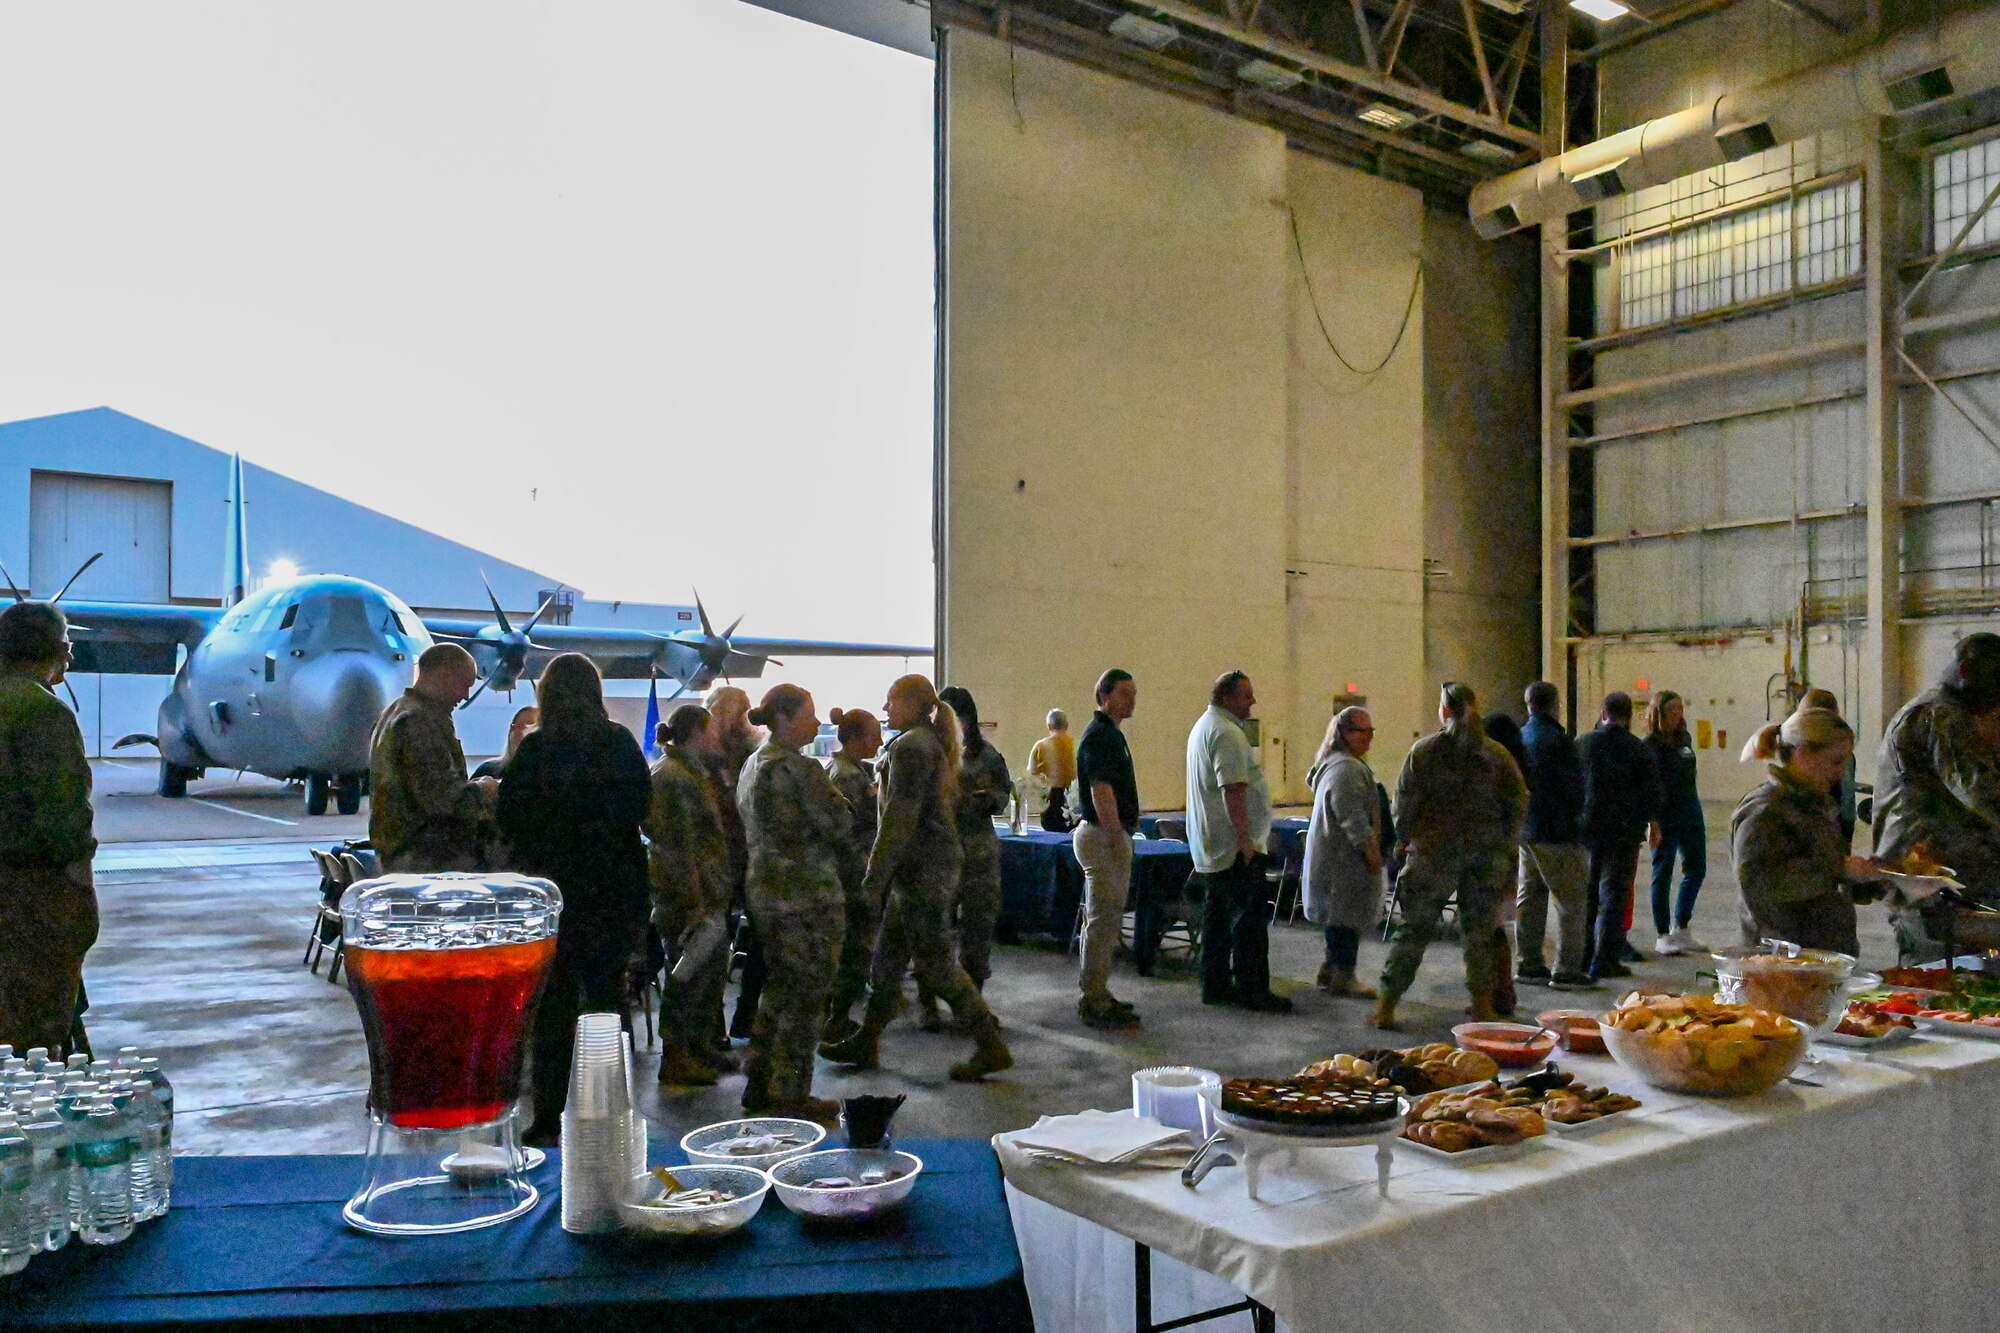 U.S. Airmen and civilians stand in a line to a buffet inside a hangar with a C-130J aircraft in the background.